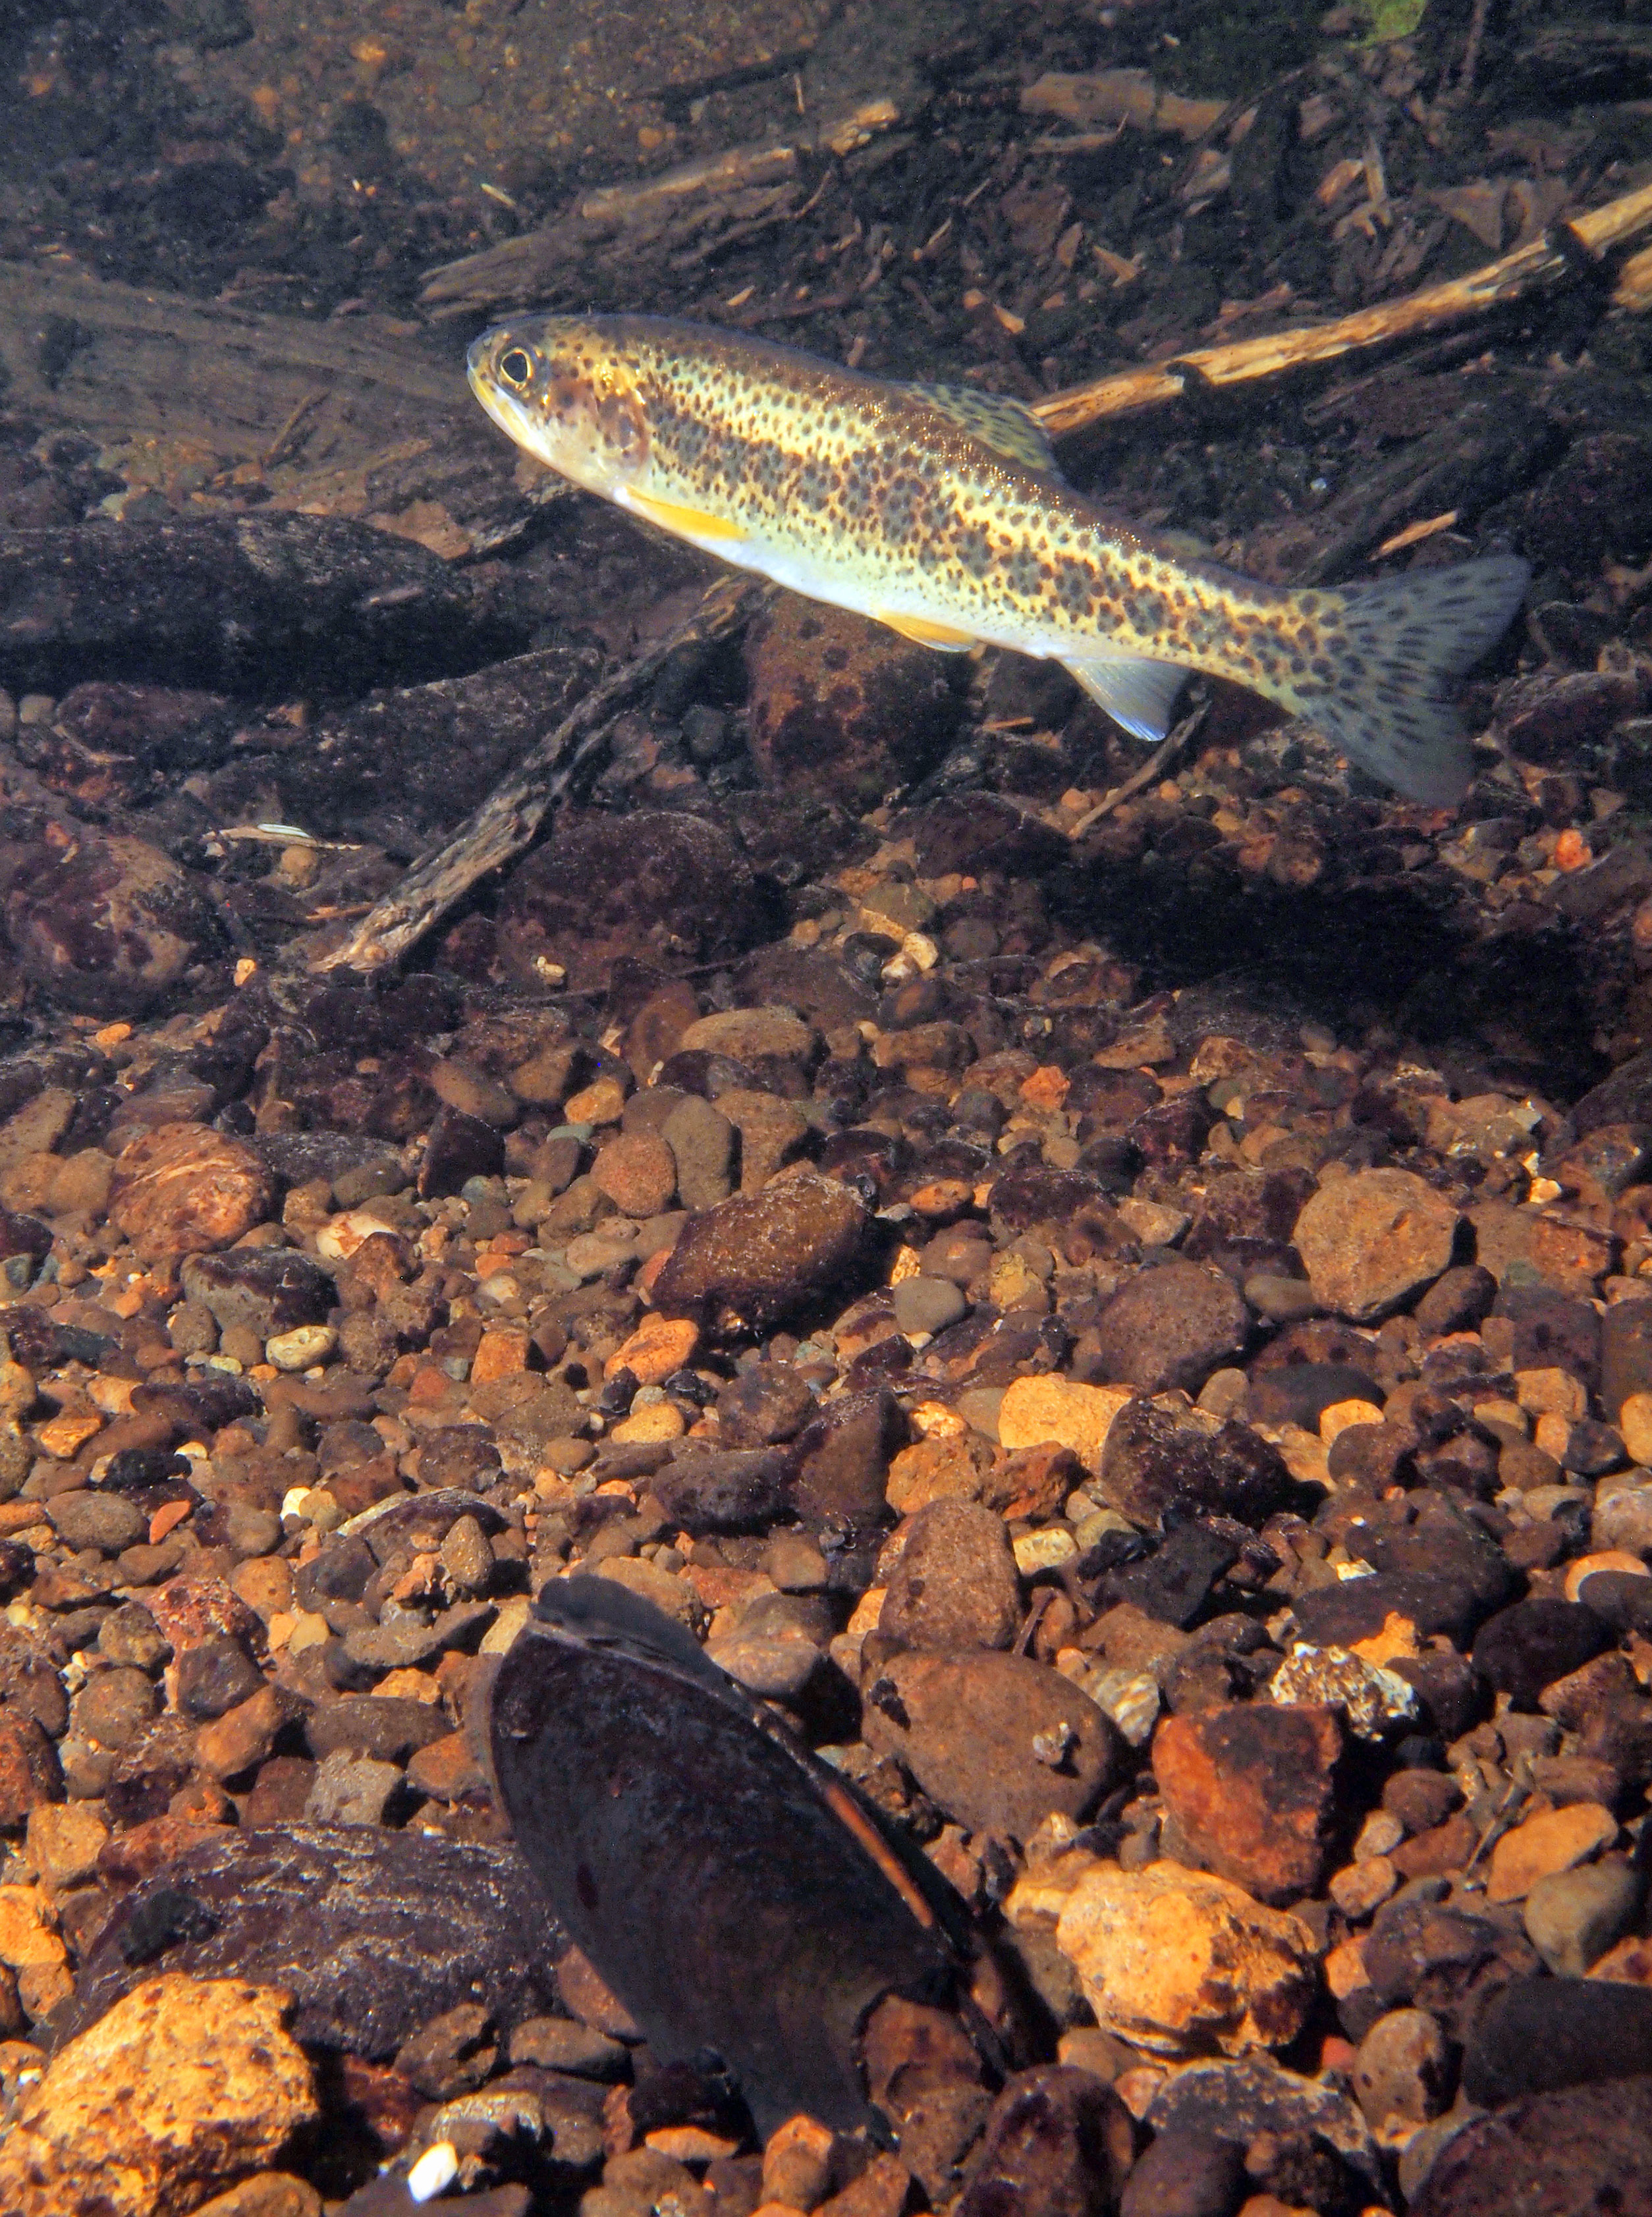 Underwater view in a creek showing a cutthroat trout swimming above a freshwater mussel.